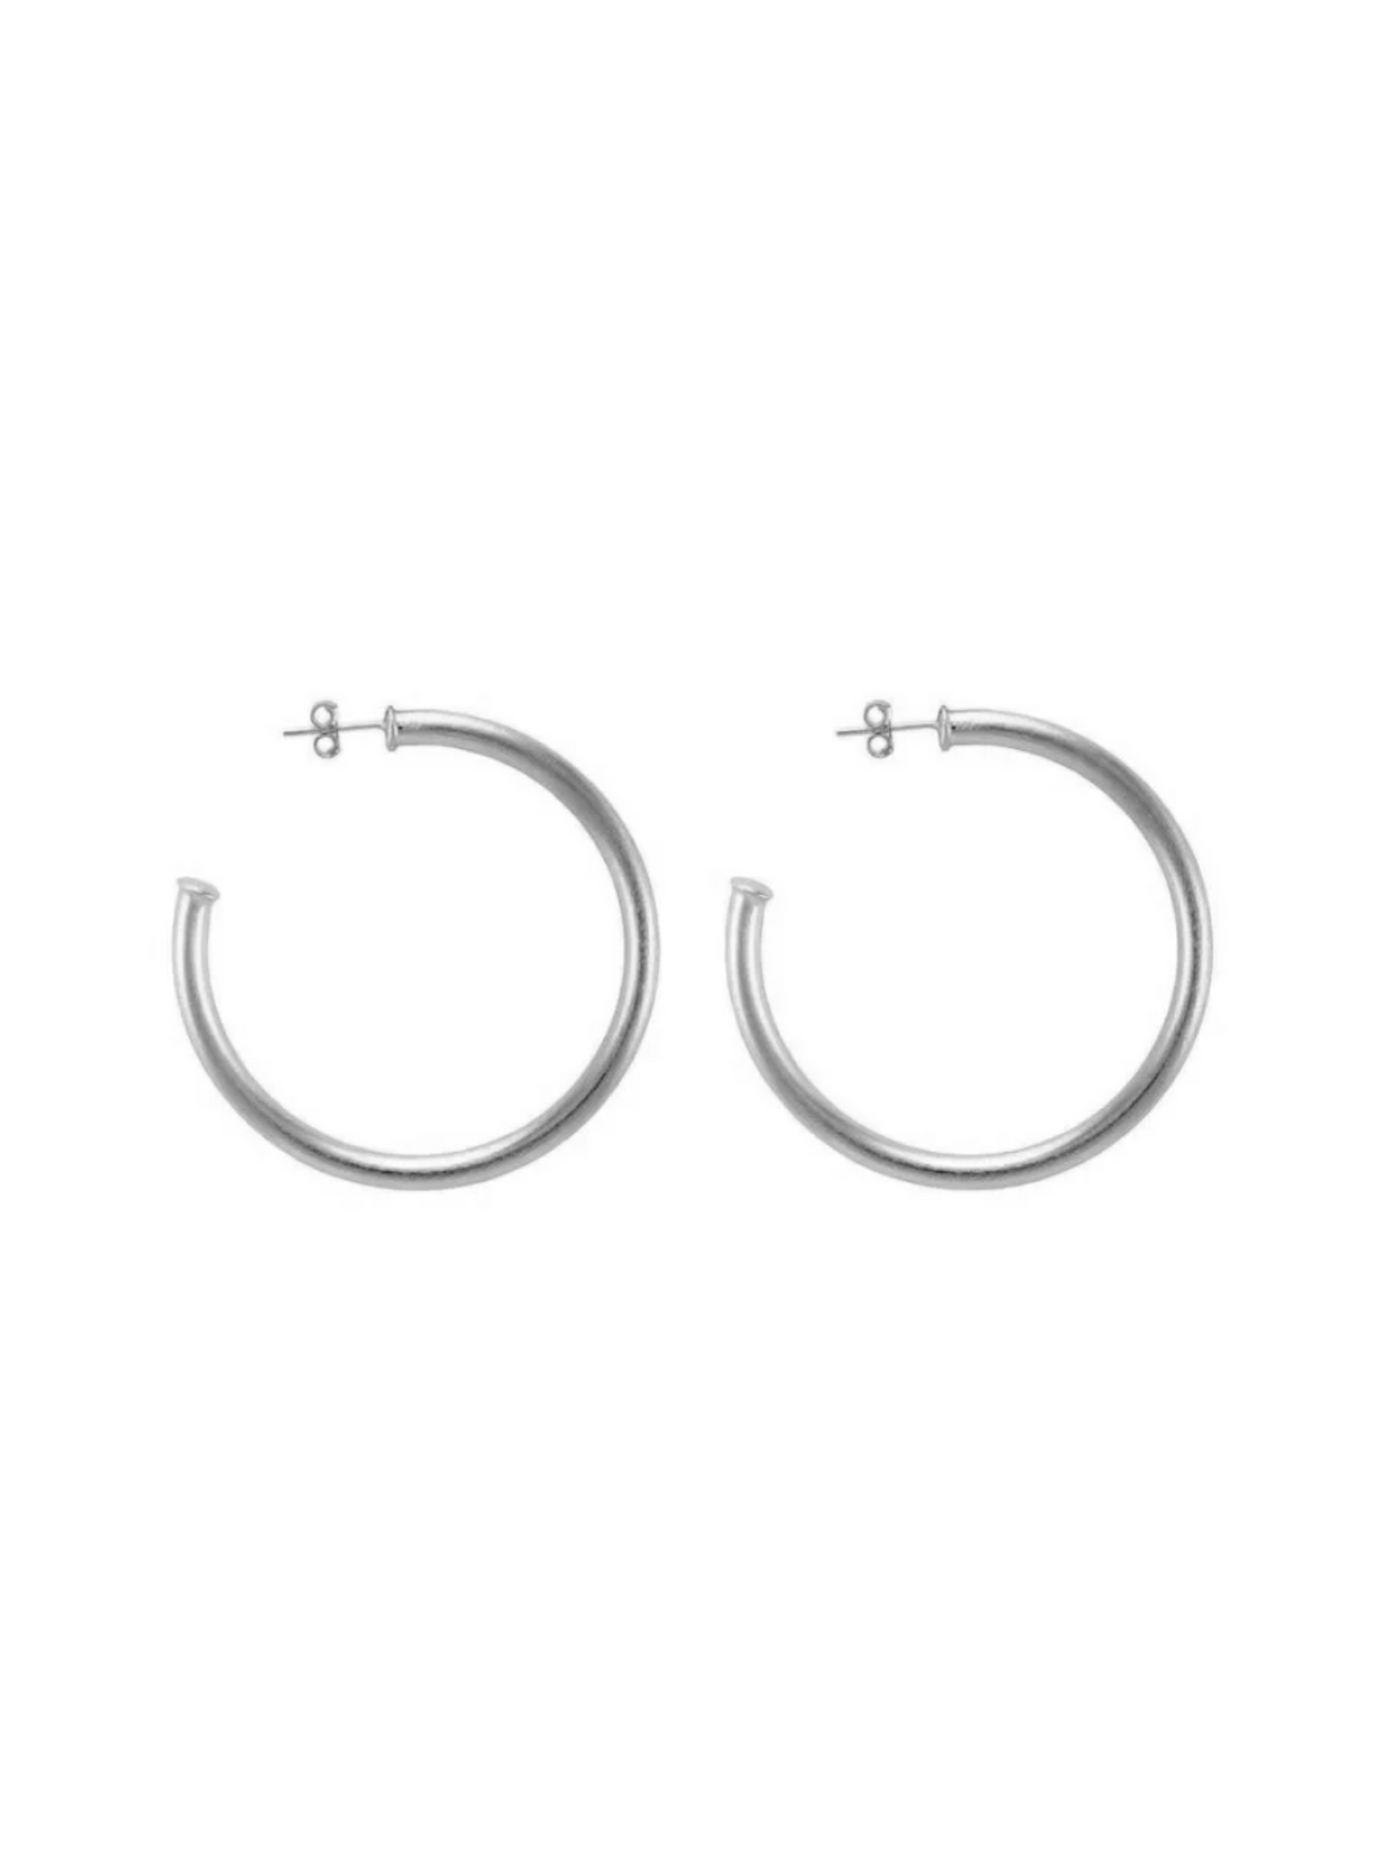 Shelia Fajl Petite Everybody's Favorite Hoops in brushed Silver on white background.